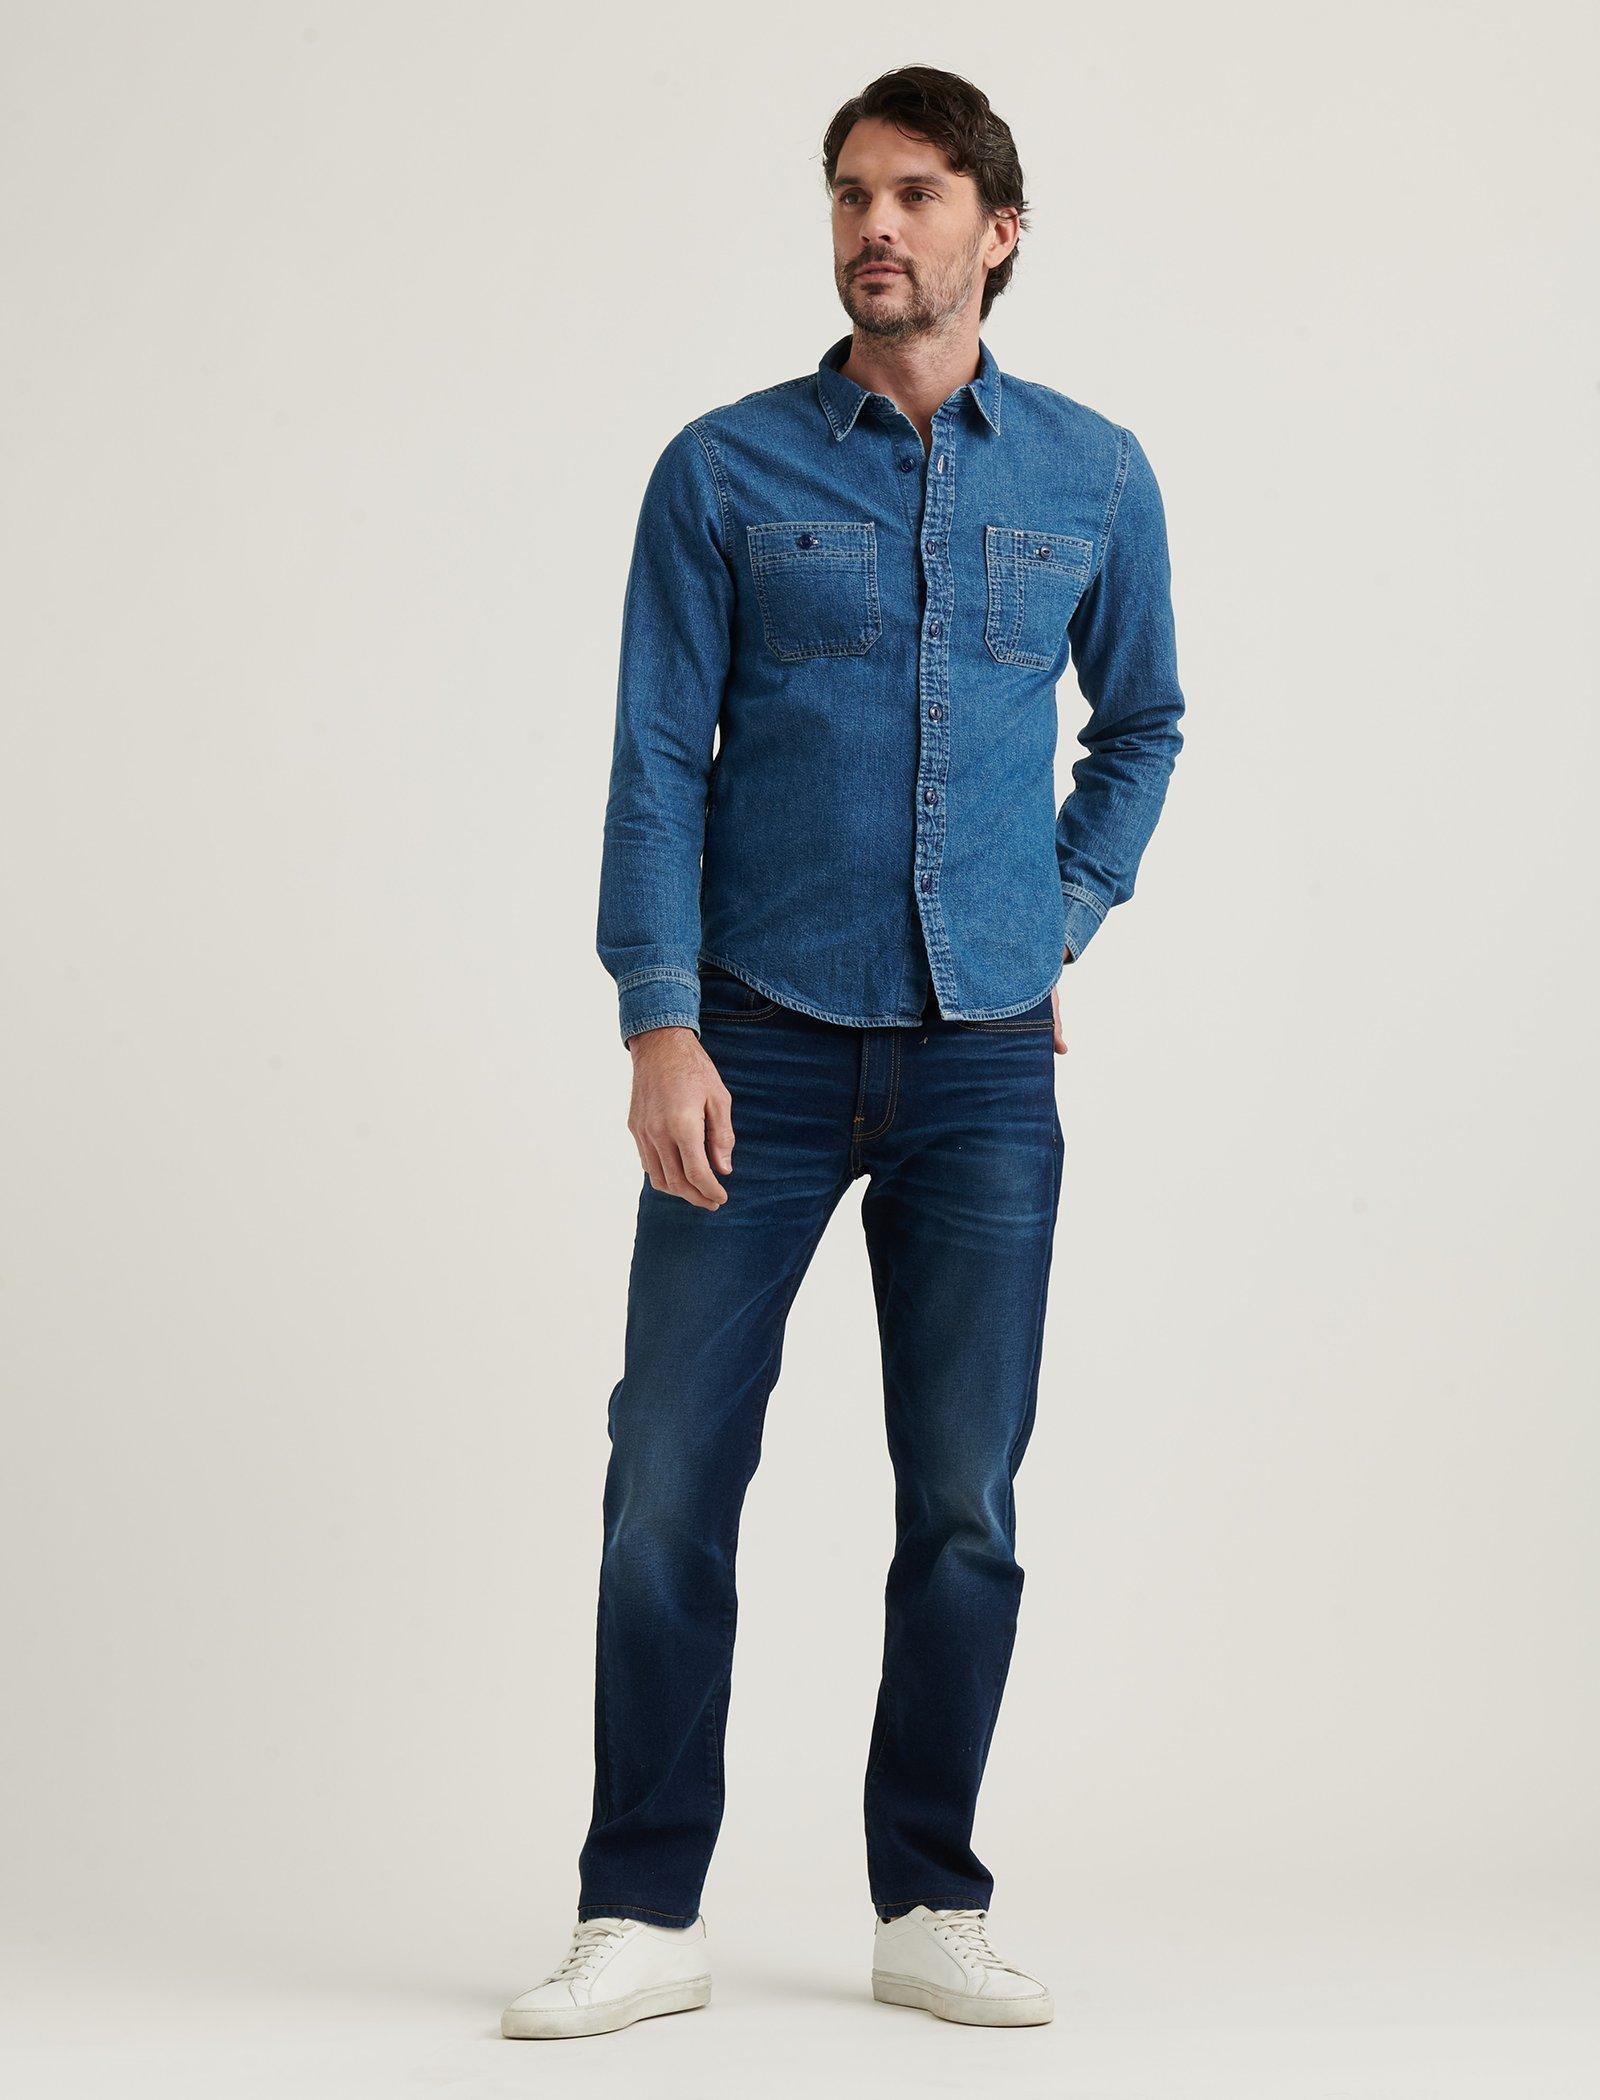 new fashionable branded double pocket solid denim shirts